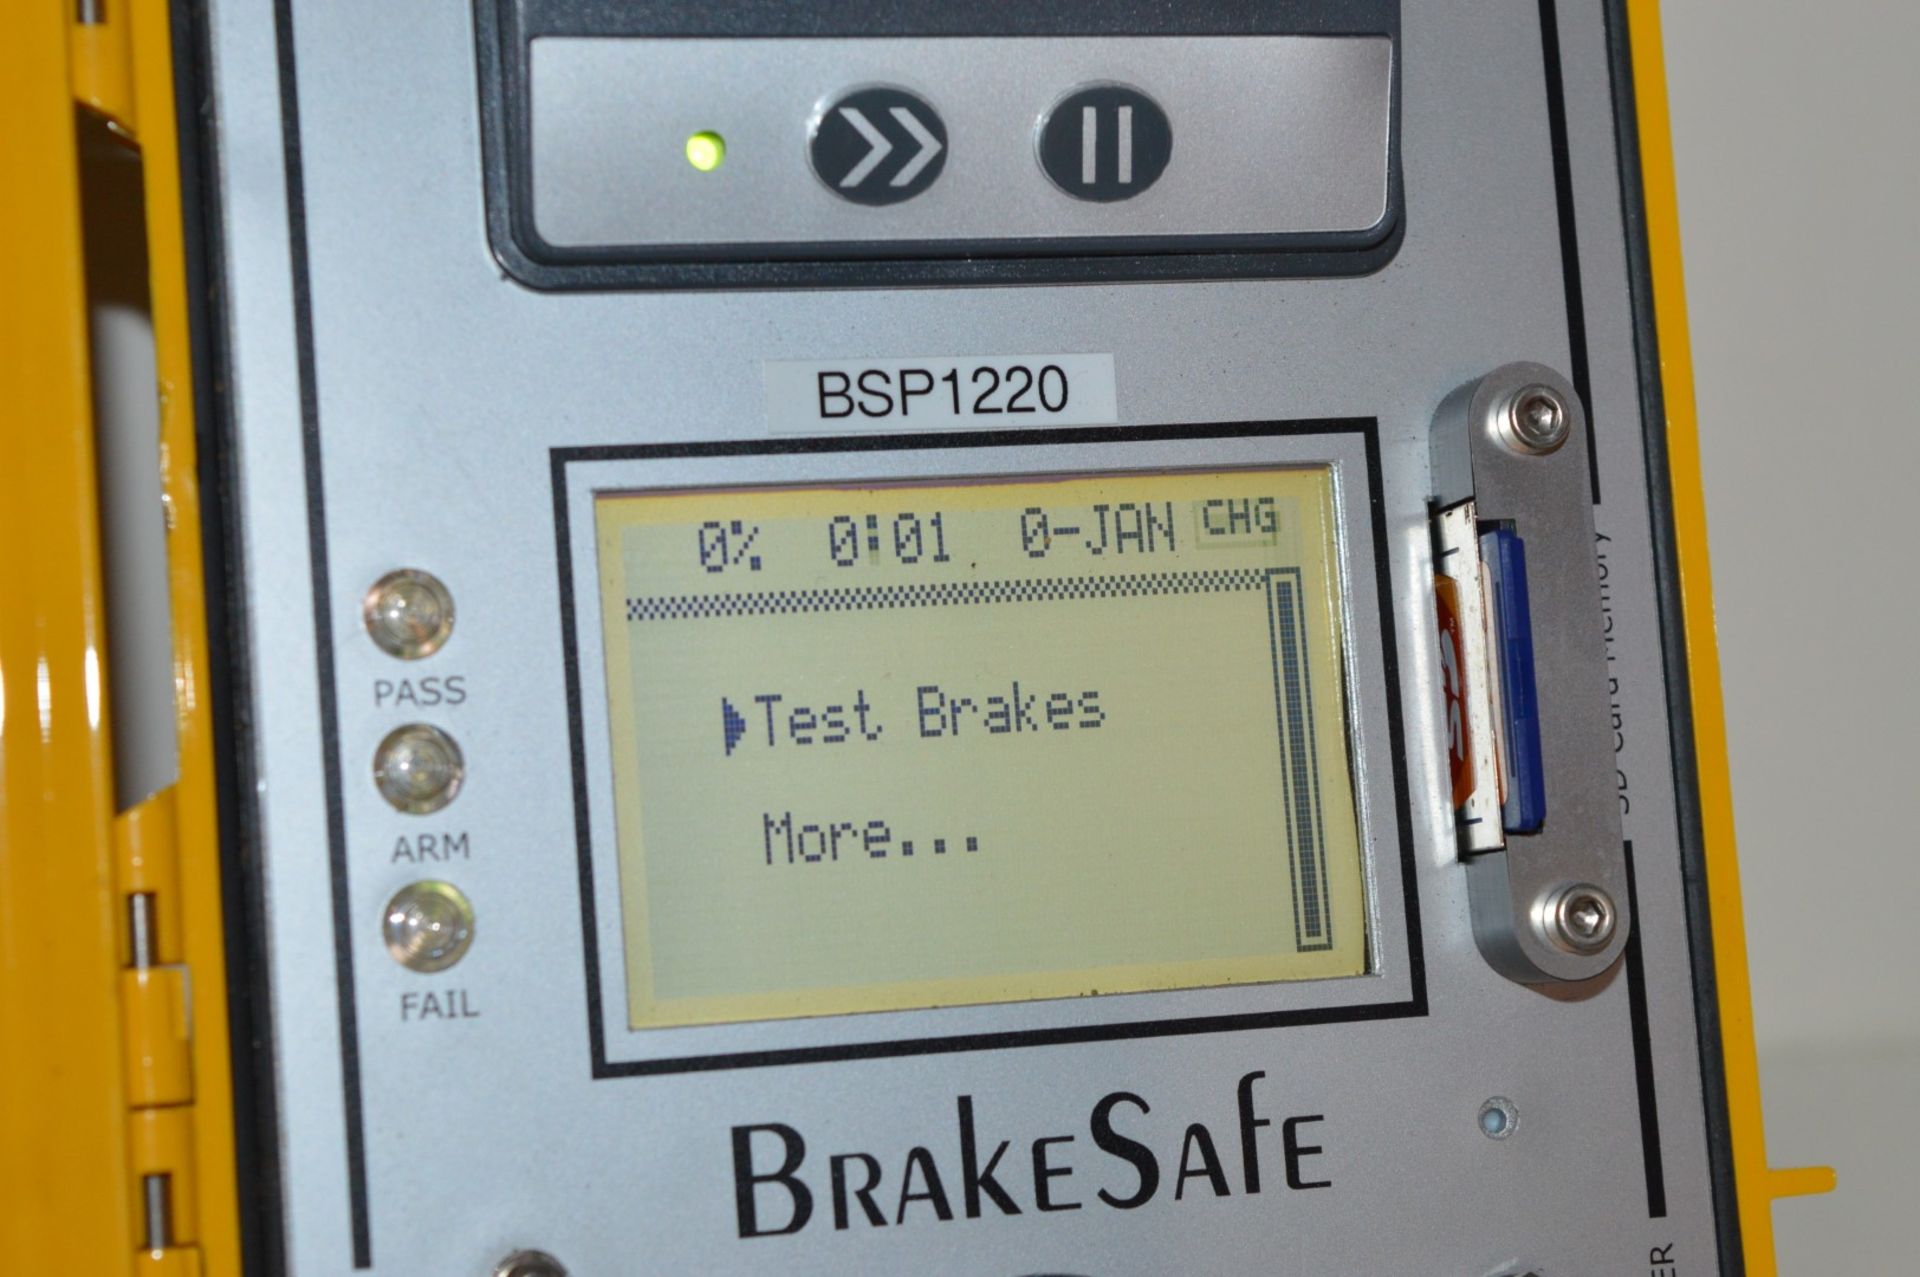 1 x BreakSafe Brake Tester With Printer - Turnkey Instruments - VOSA Approved For All Cars, HGVs and - Image 6 of 10